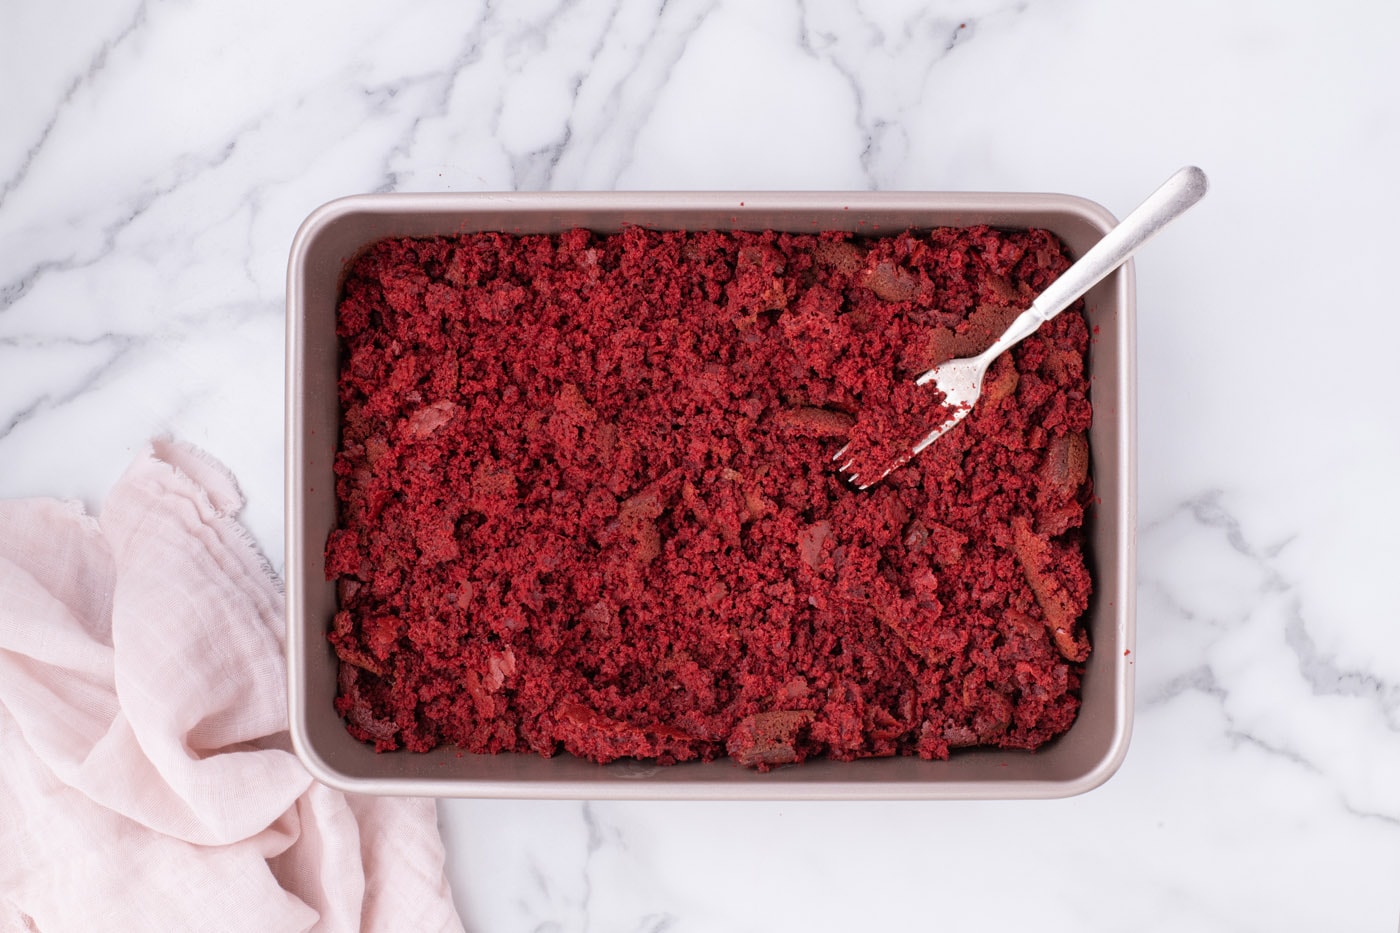 crumbled red velvet cake in a baking dish